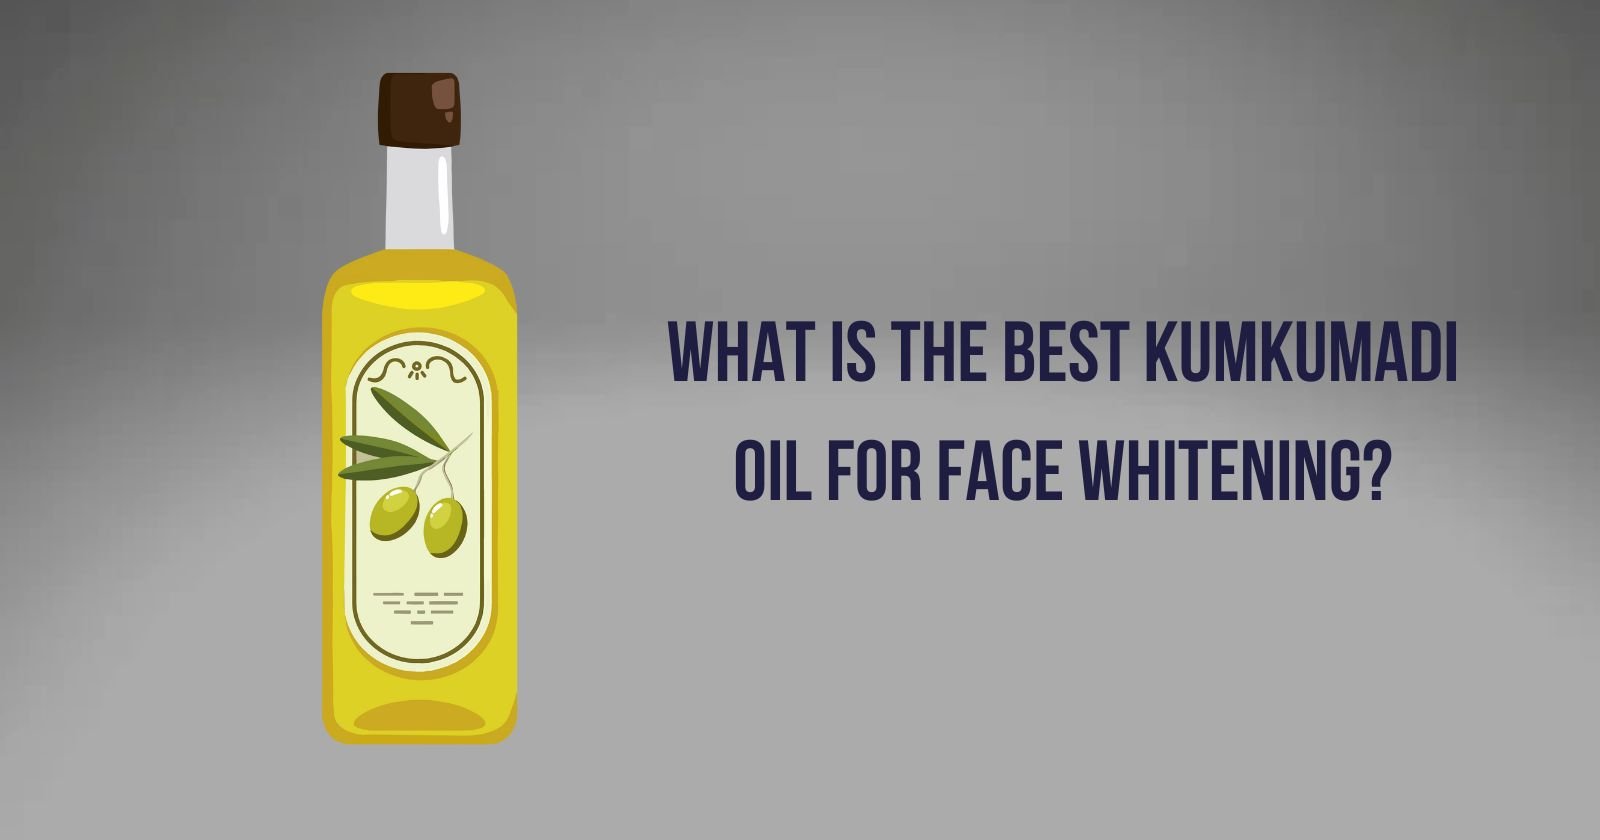 What is the Best Kumkumadi Oil for Face Whitening?